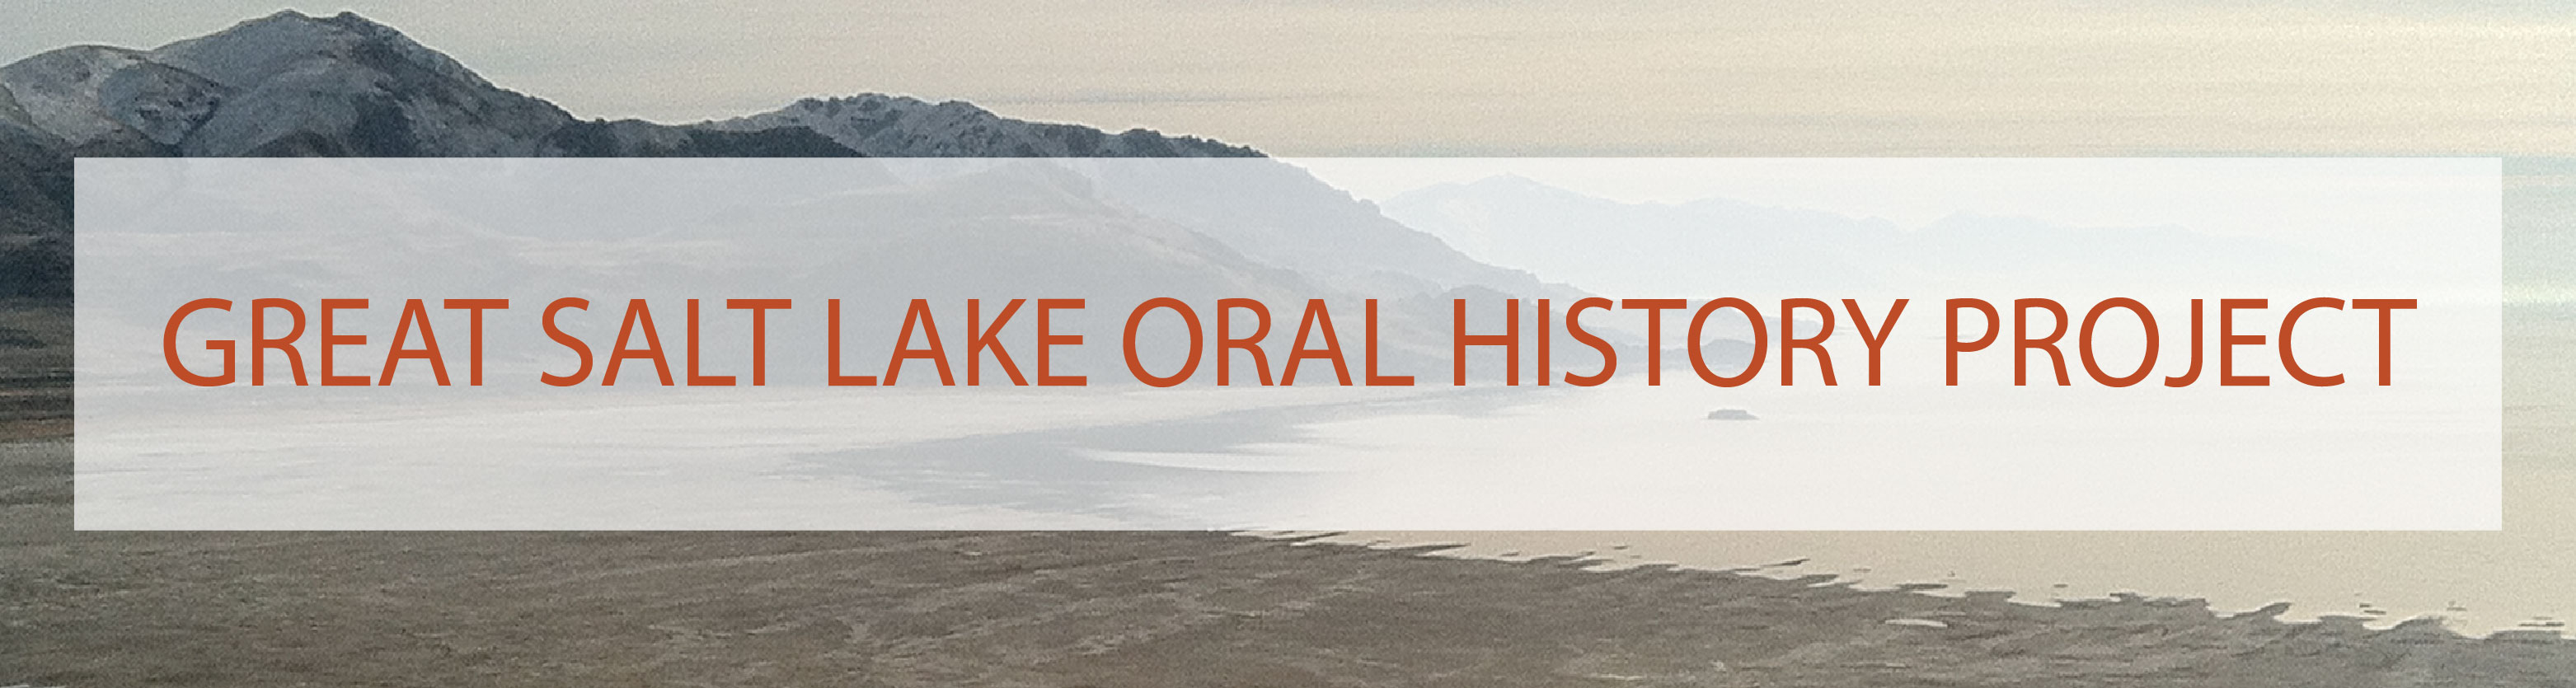 Great Salt Lake Oral History Project